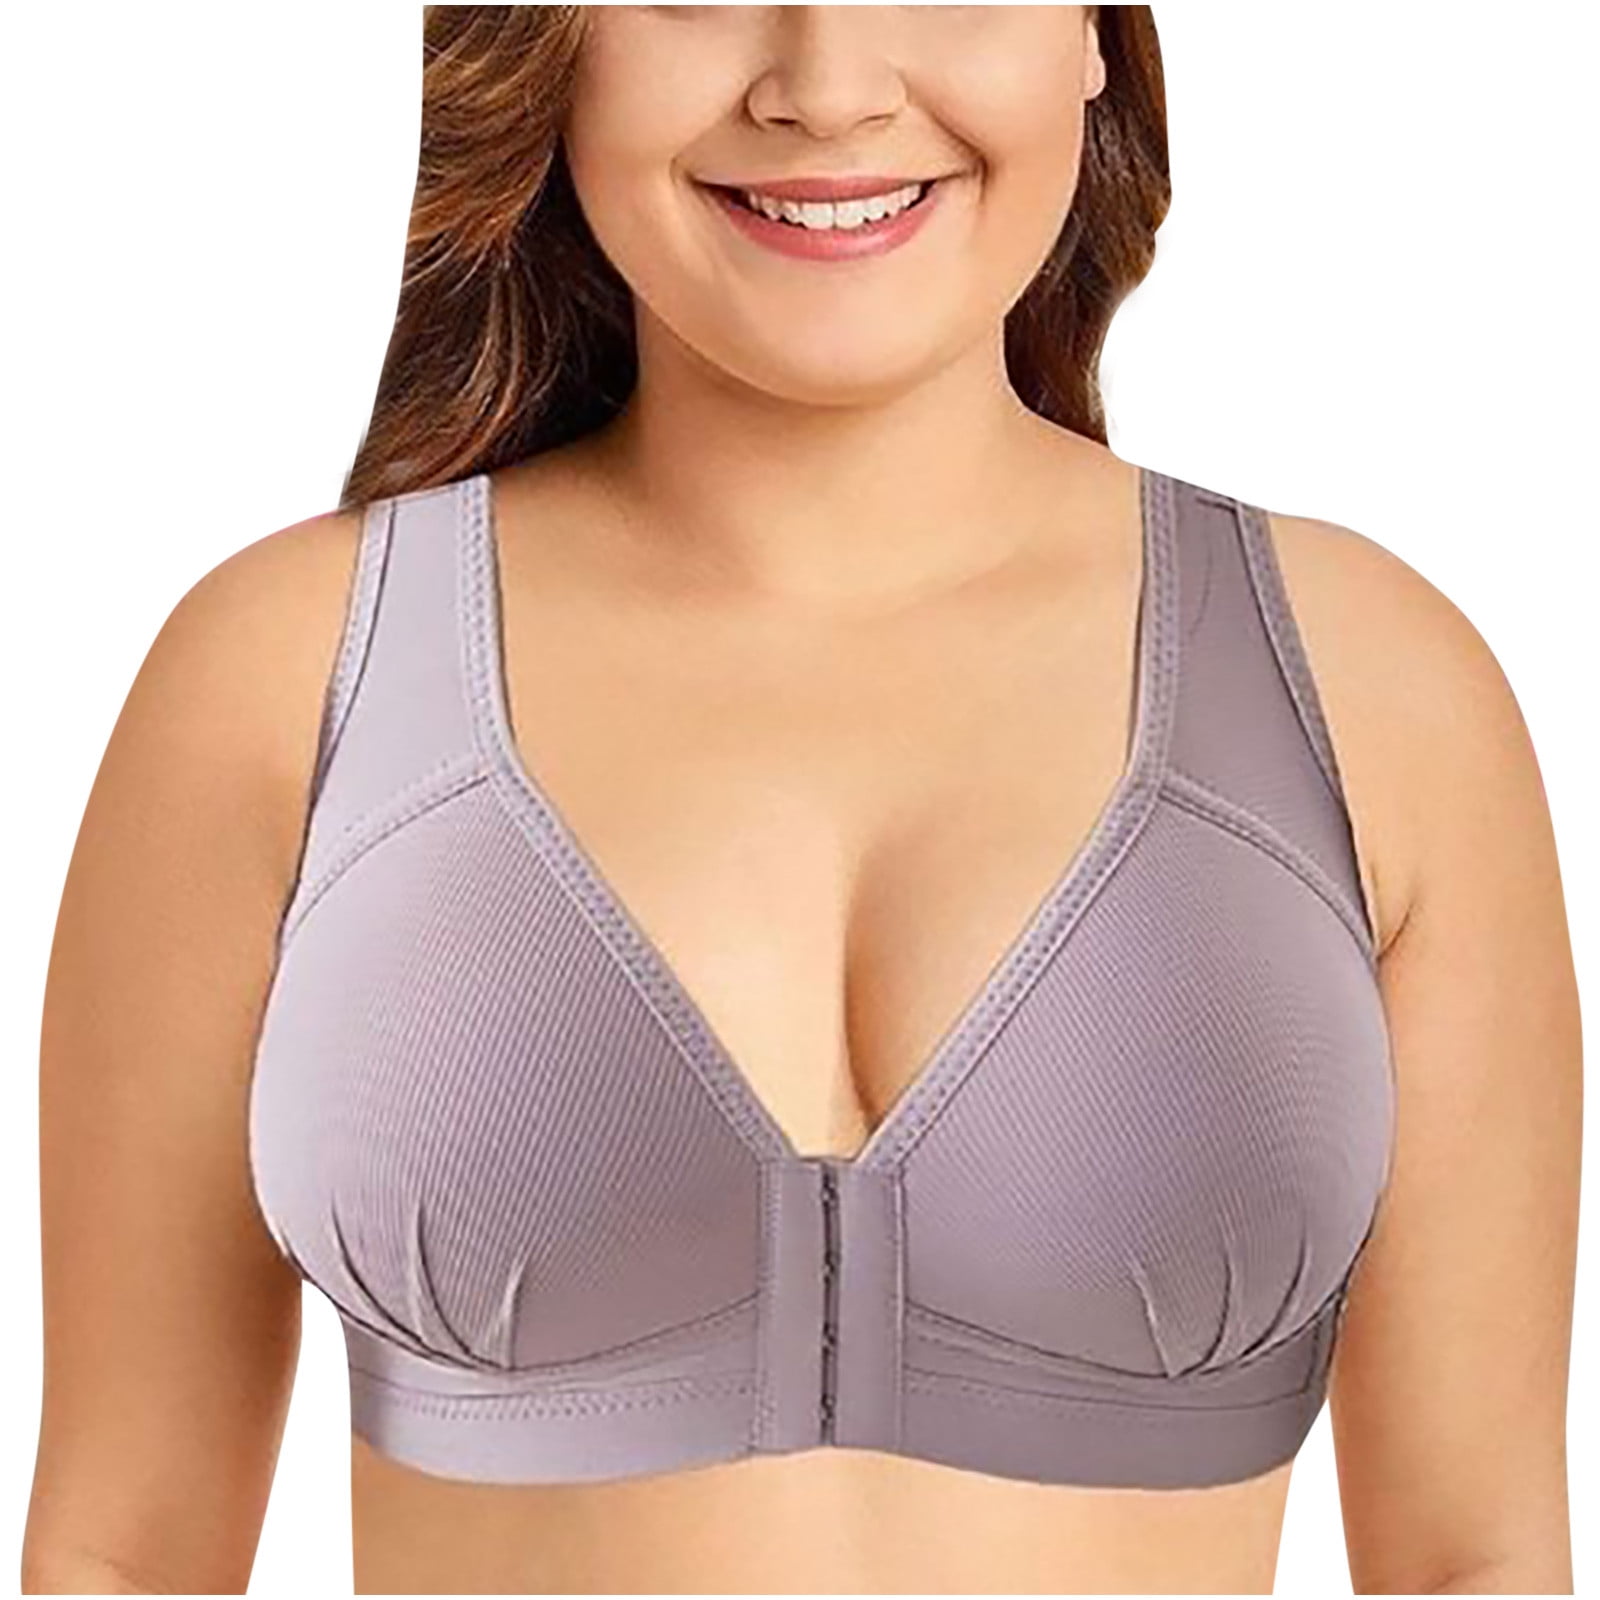 Qcmgmg Women's Comfort Full-Coverage Minimizer Bras Support Front